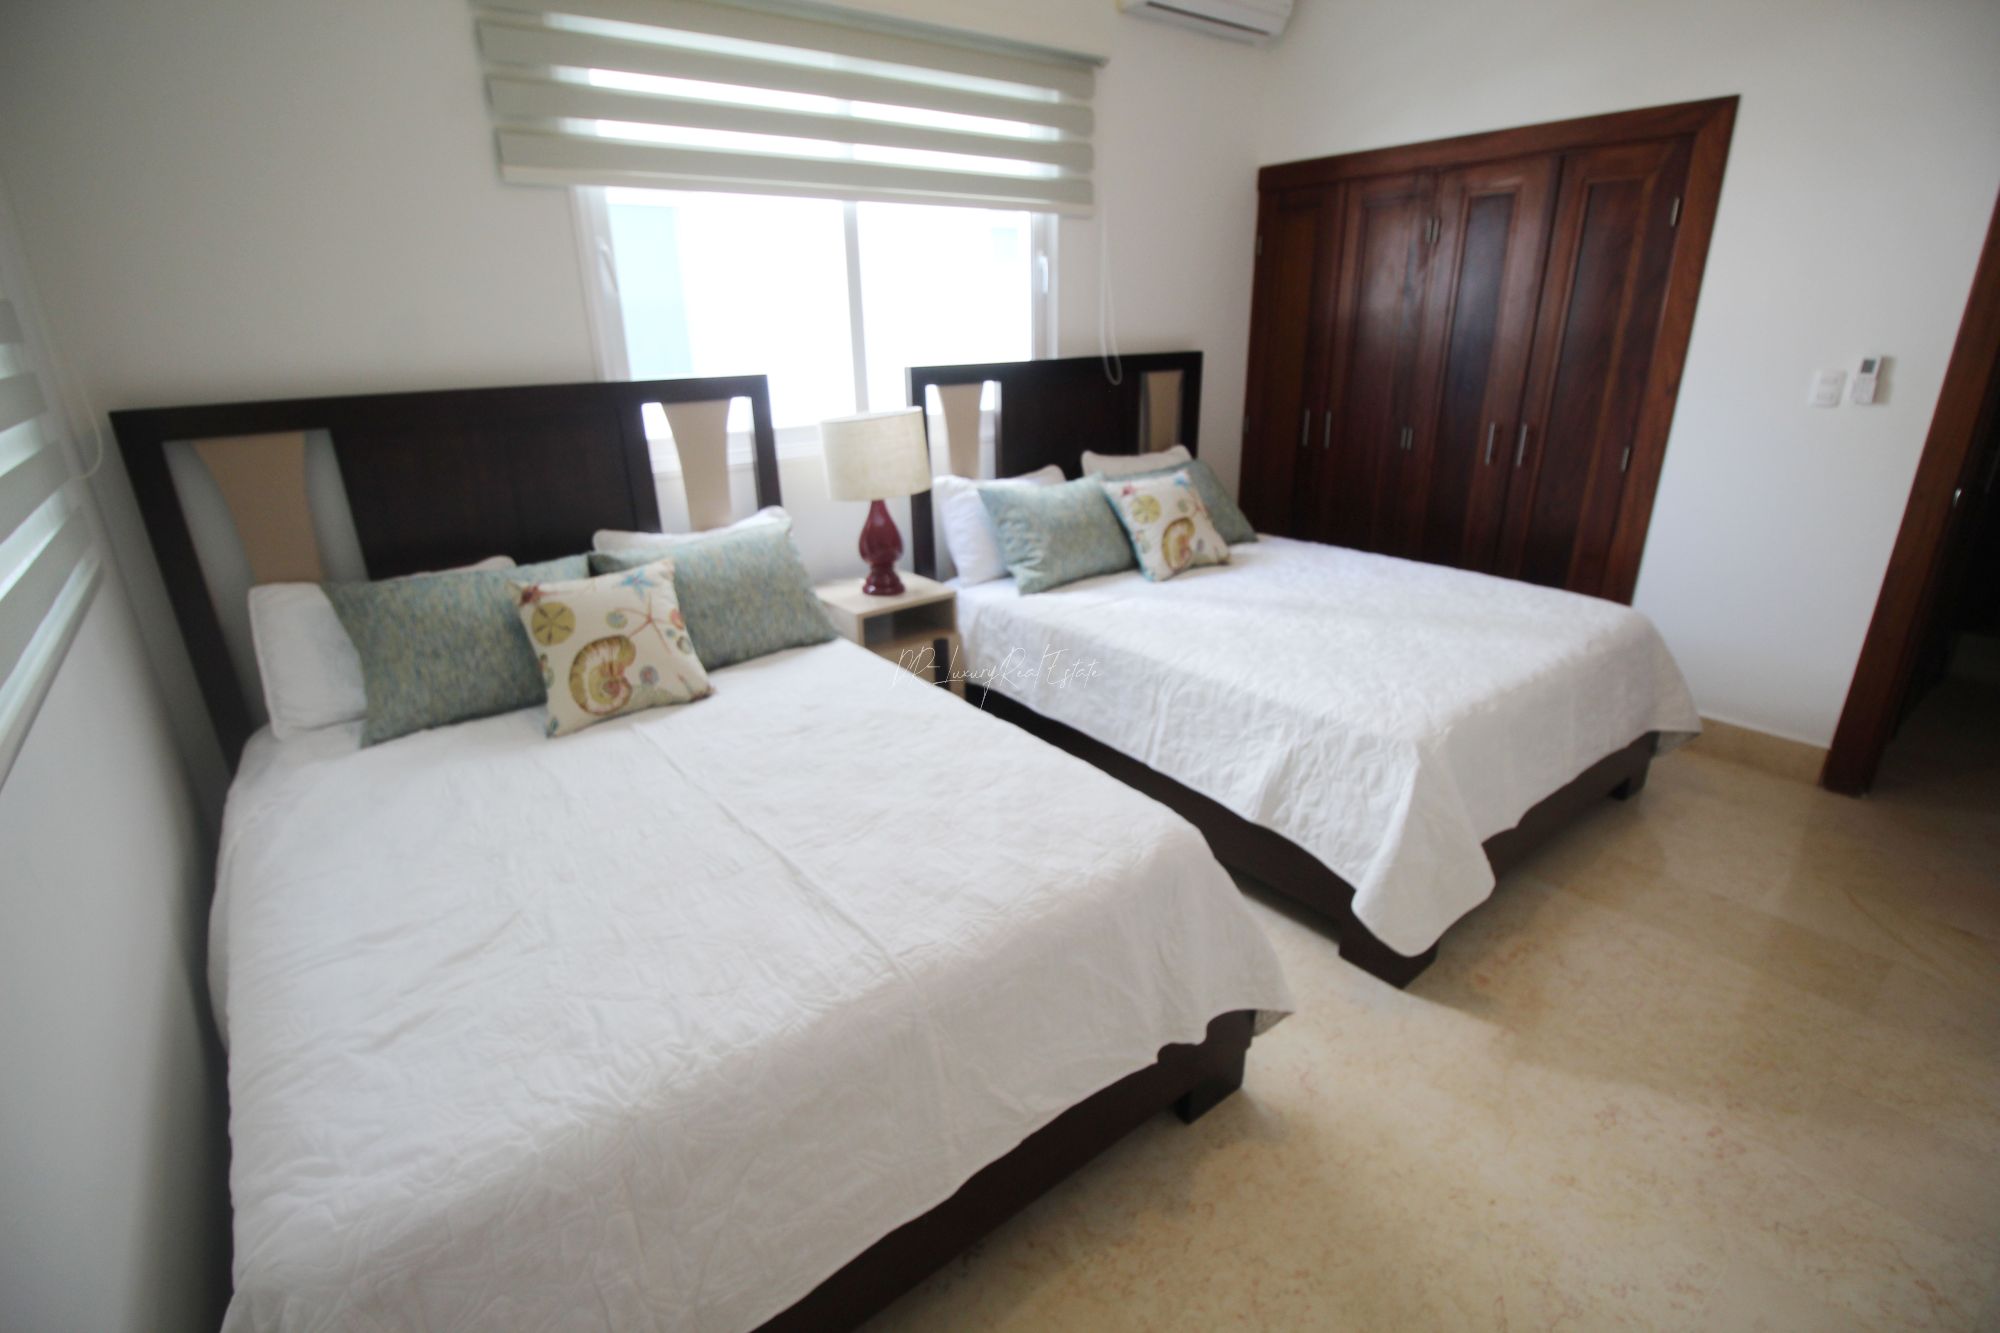 #10 Beautiful modern beachfront condo with 3 bedrooms